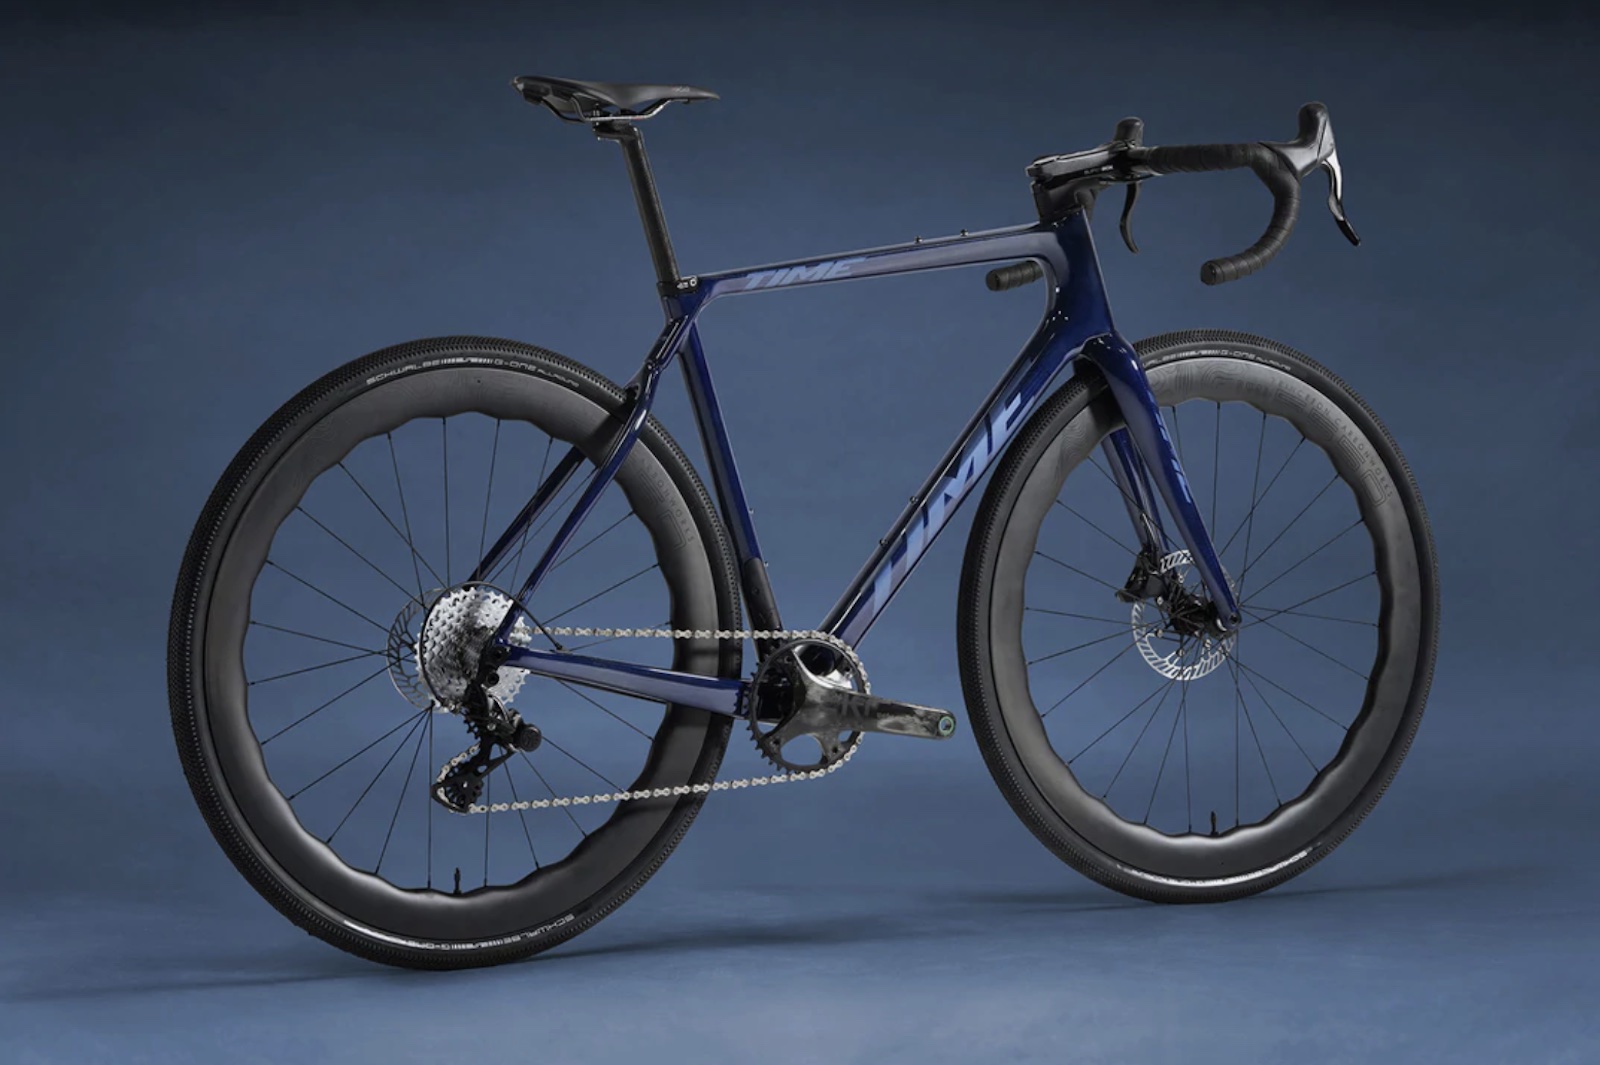 TIME's new ADHX Gravel bike, built with Campagnolo's Ekar gravel group. Photo courtesy Velo Premiere/Time Bicycles America